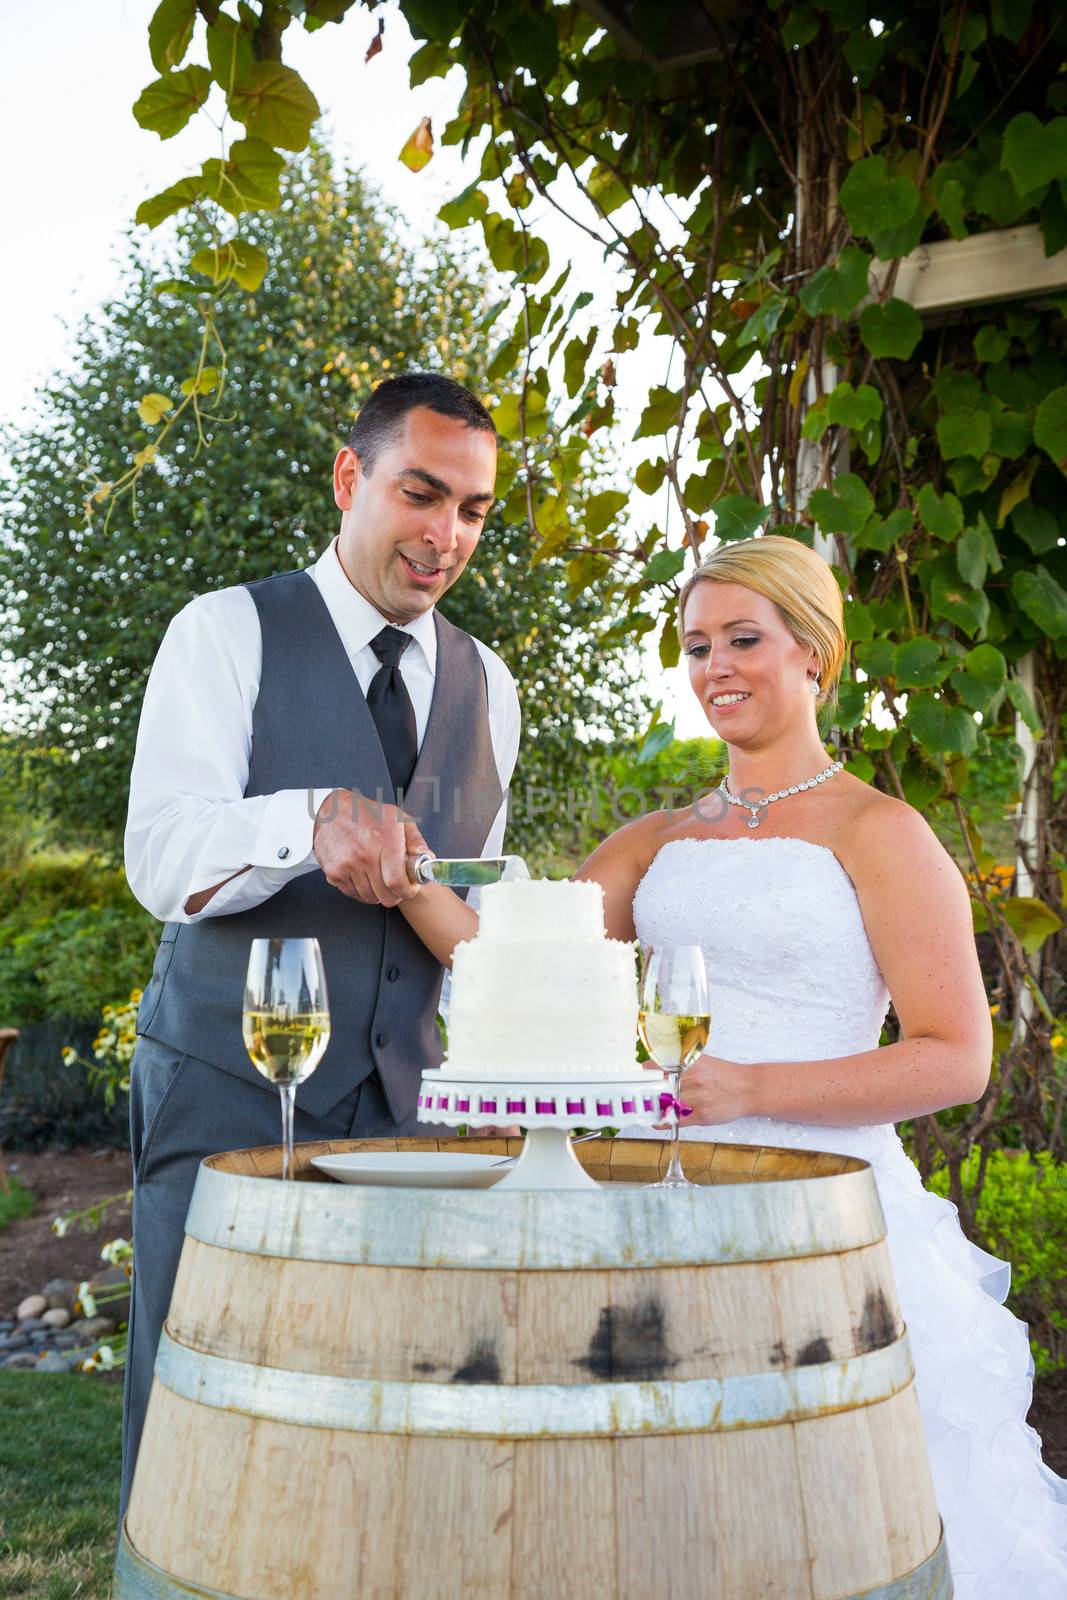 Bride and Groom Cake Cutting by joshuaraineyphotography